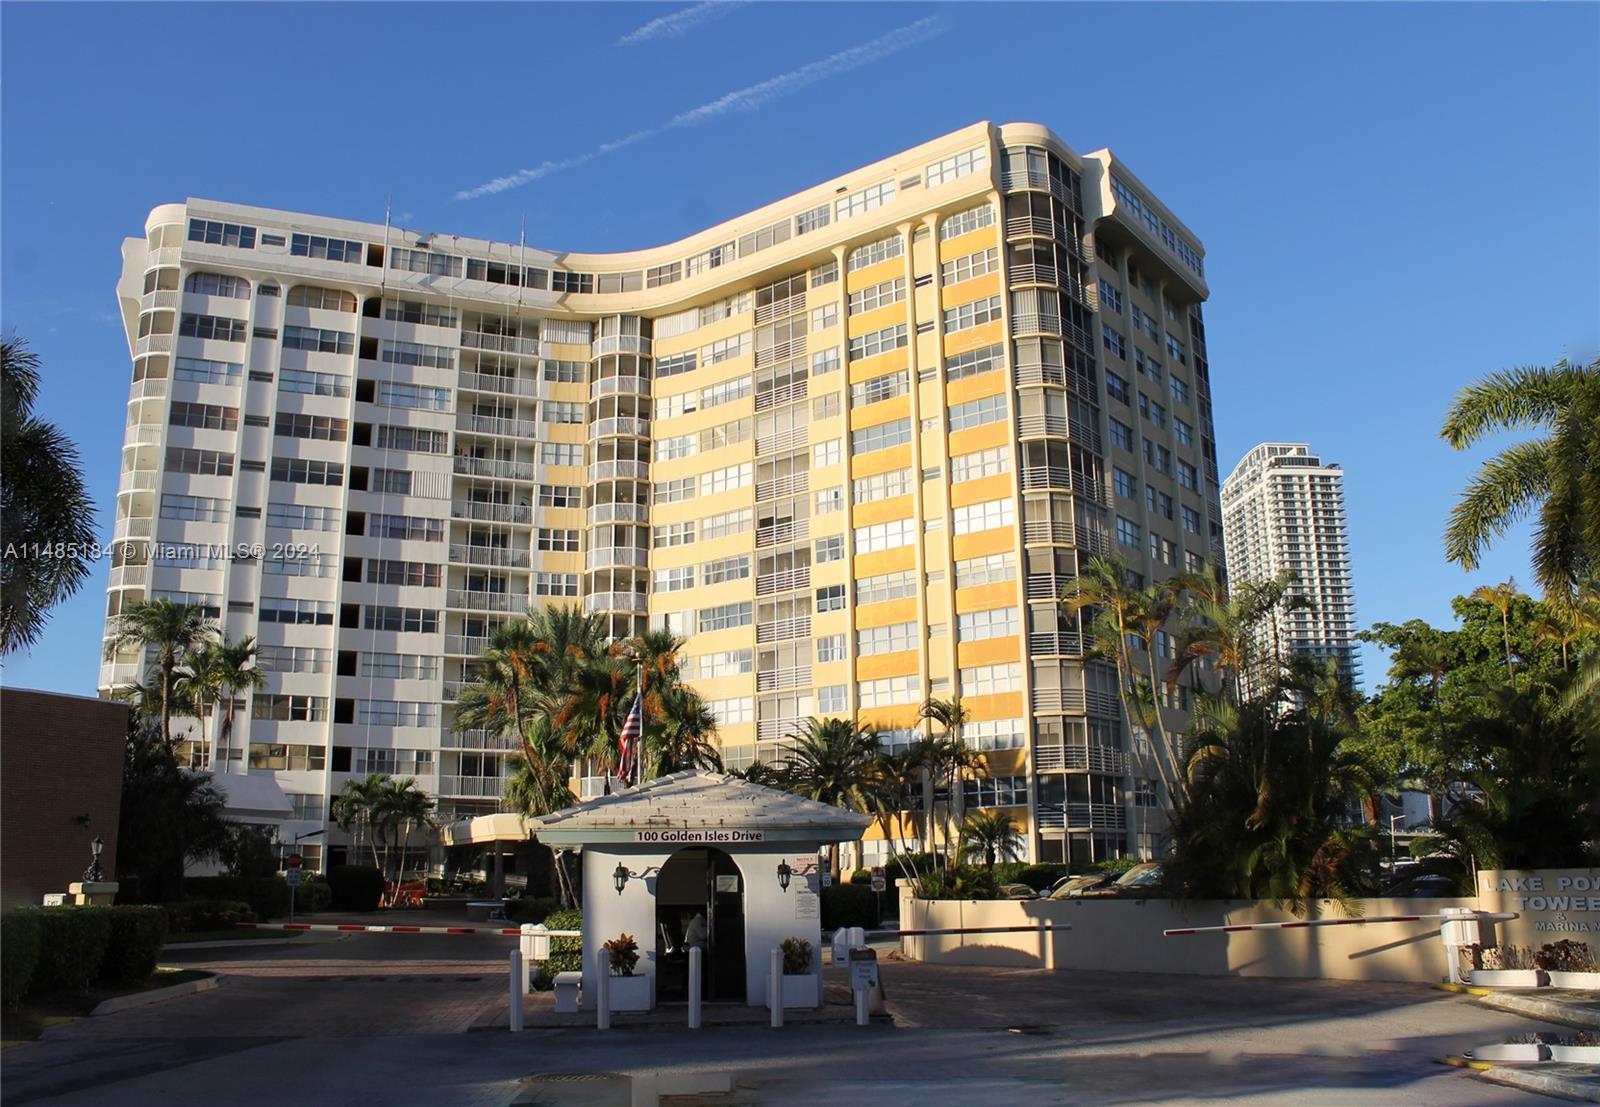 WALKING DISTANCE TO BEACH. BEAUTIFUL BAY AND SKYLINE VIEW FROM EVERY ROOM AND BALCONY. READY TO MOVE